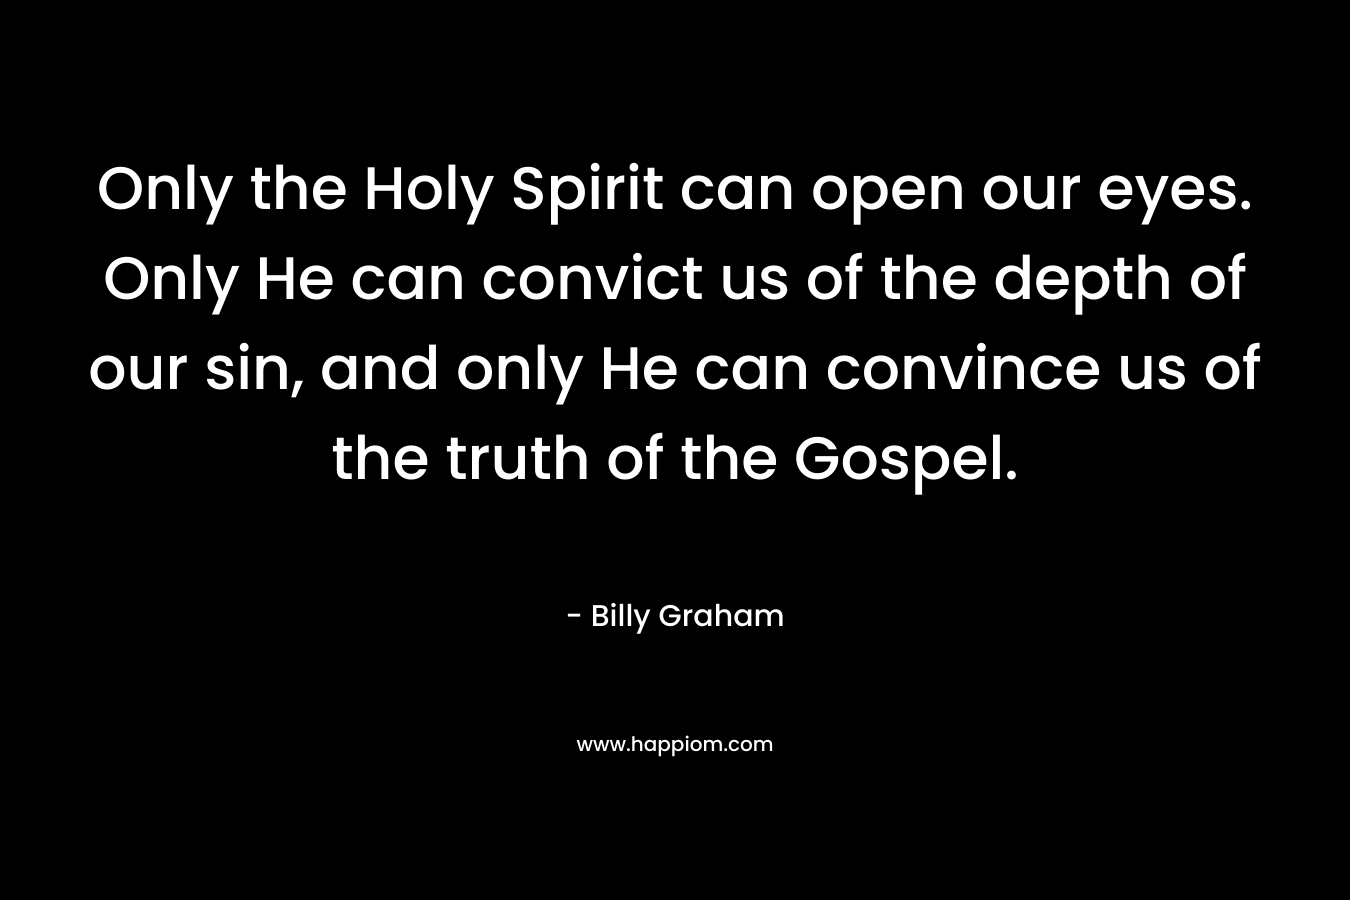 Only the Holy Spirit can open our eyes. Only He can convict us of the depth of our sin, and only He can convince us of the truth of the Gospel. – Billy Graham